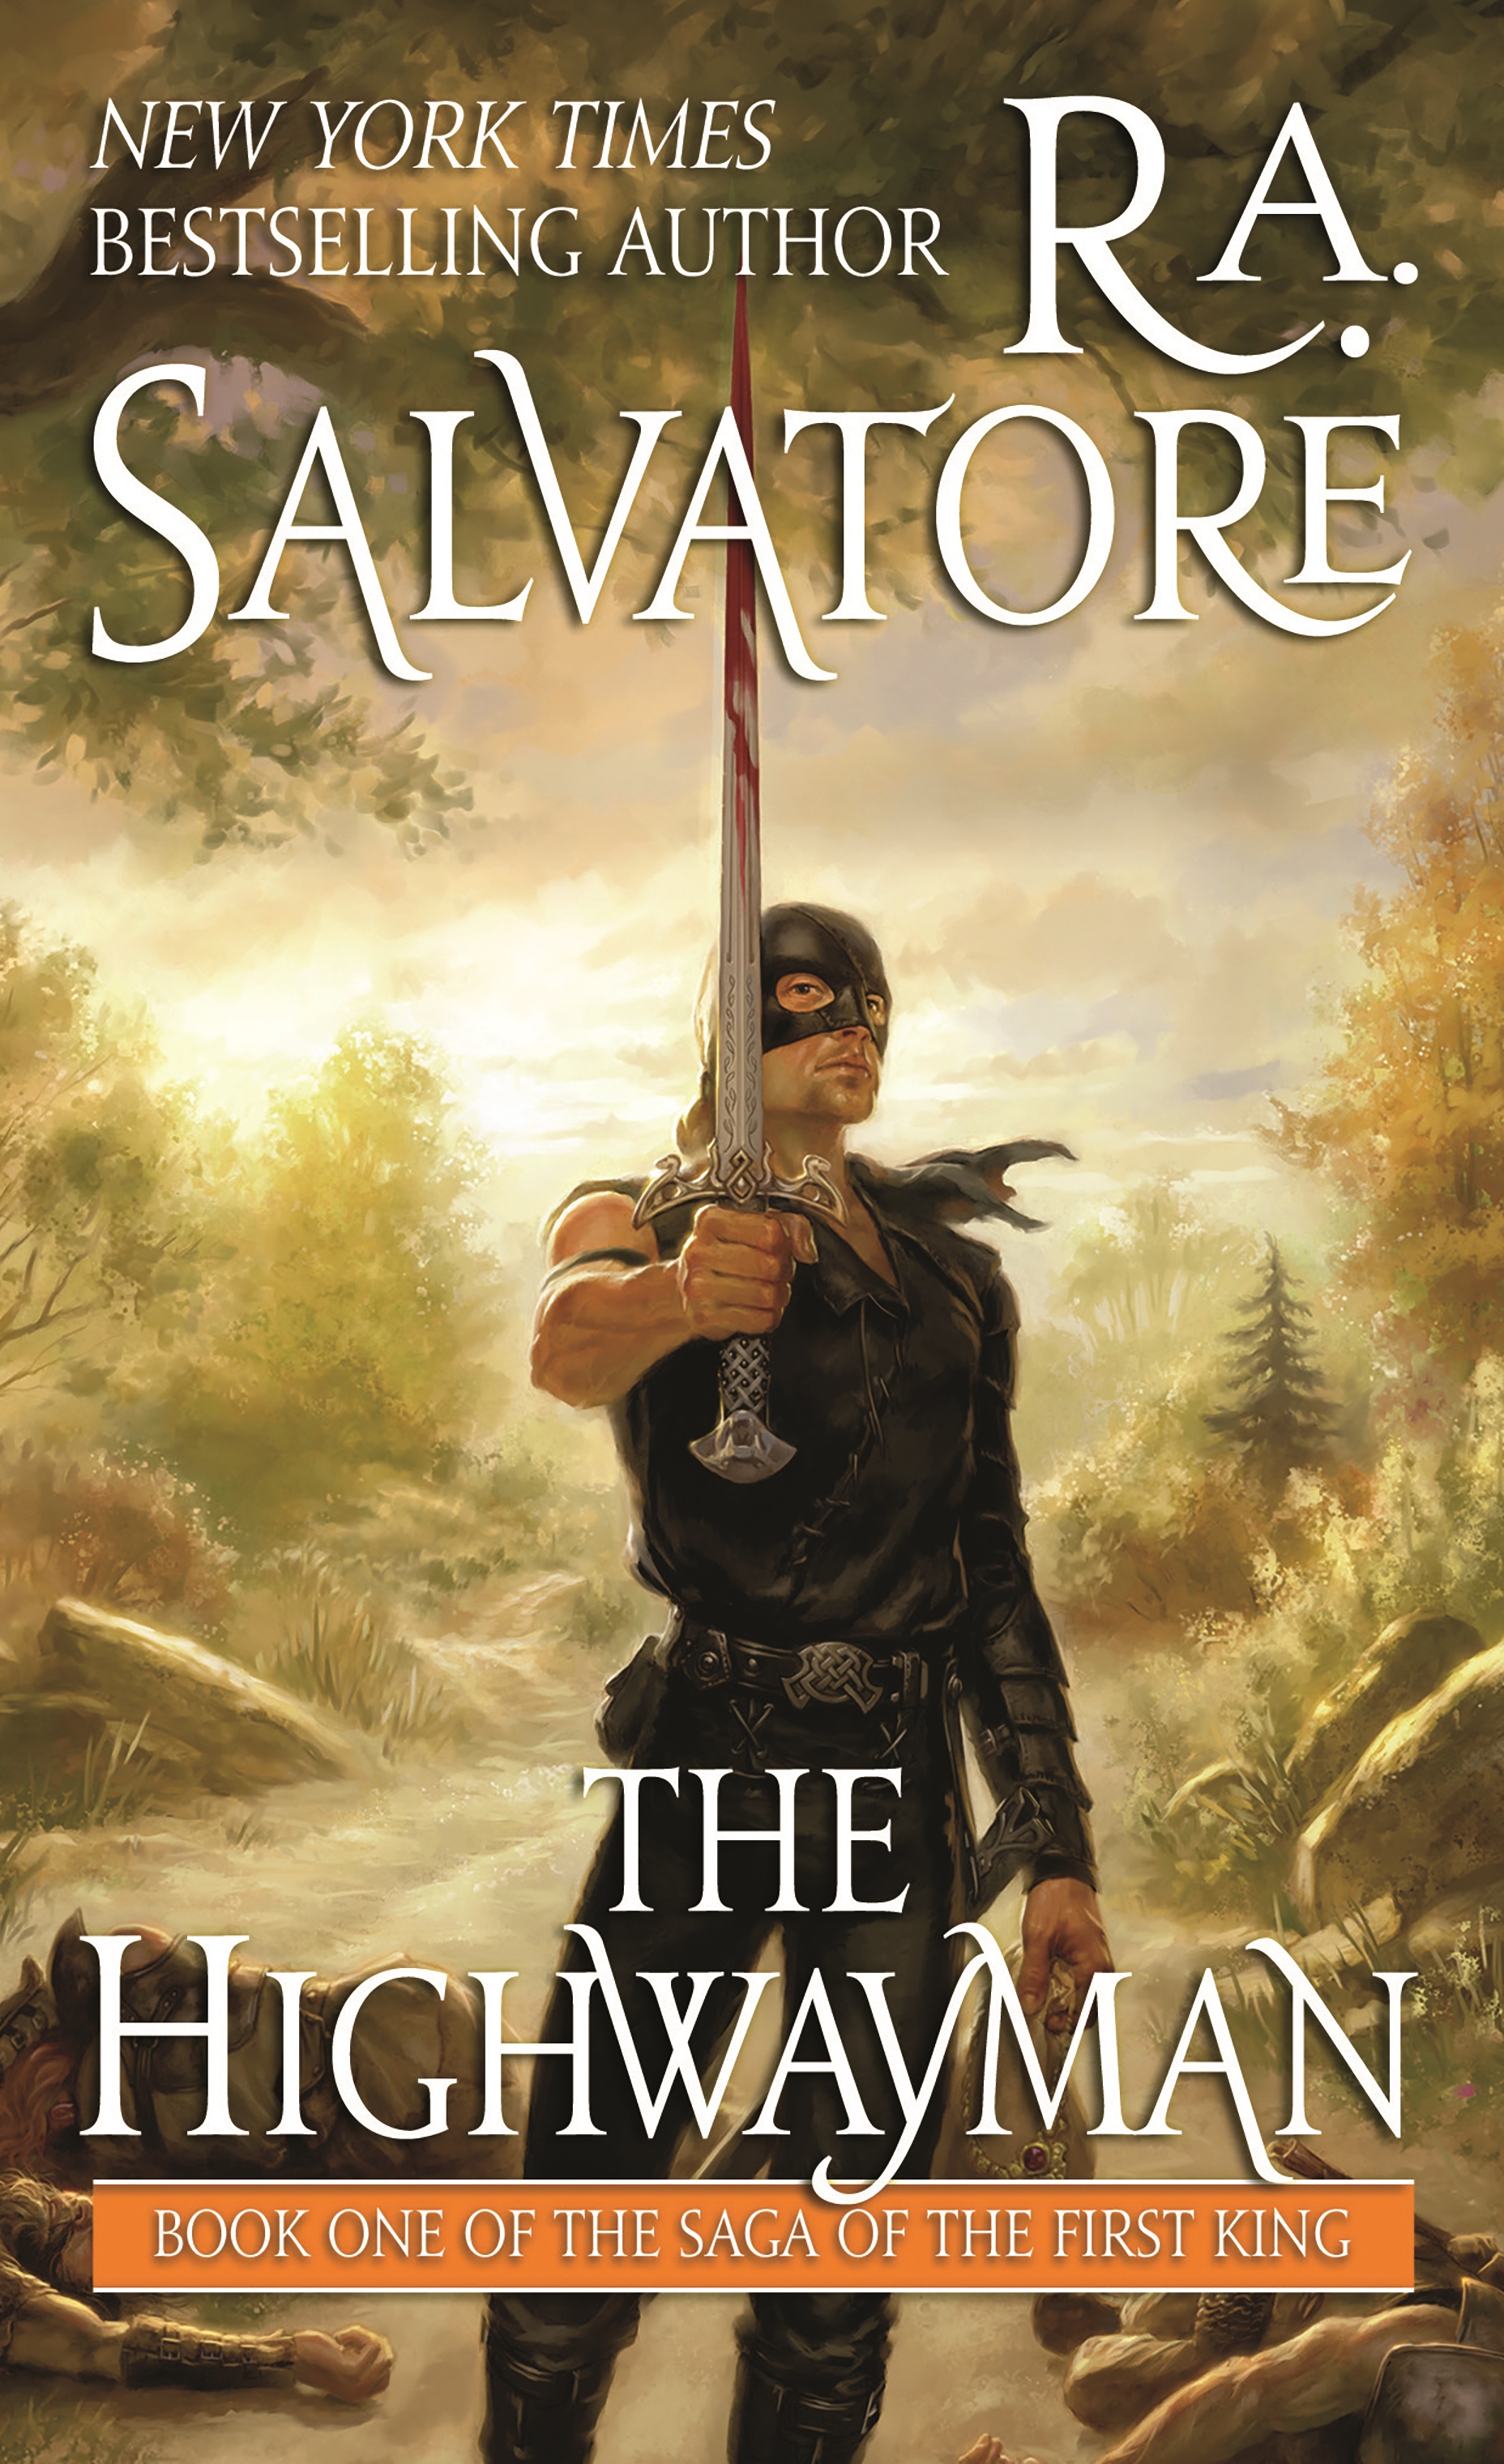 The Highwayman : Book One of the Saga of the First King by R. A. Salvatore